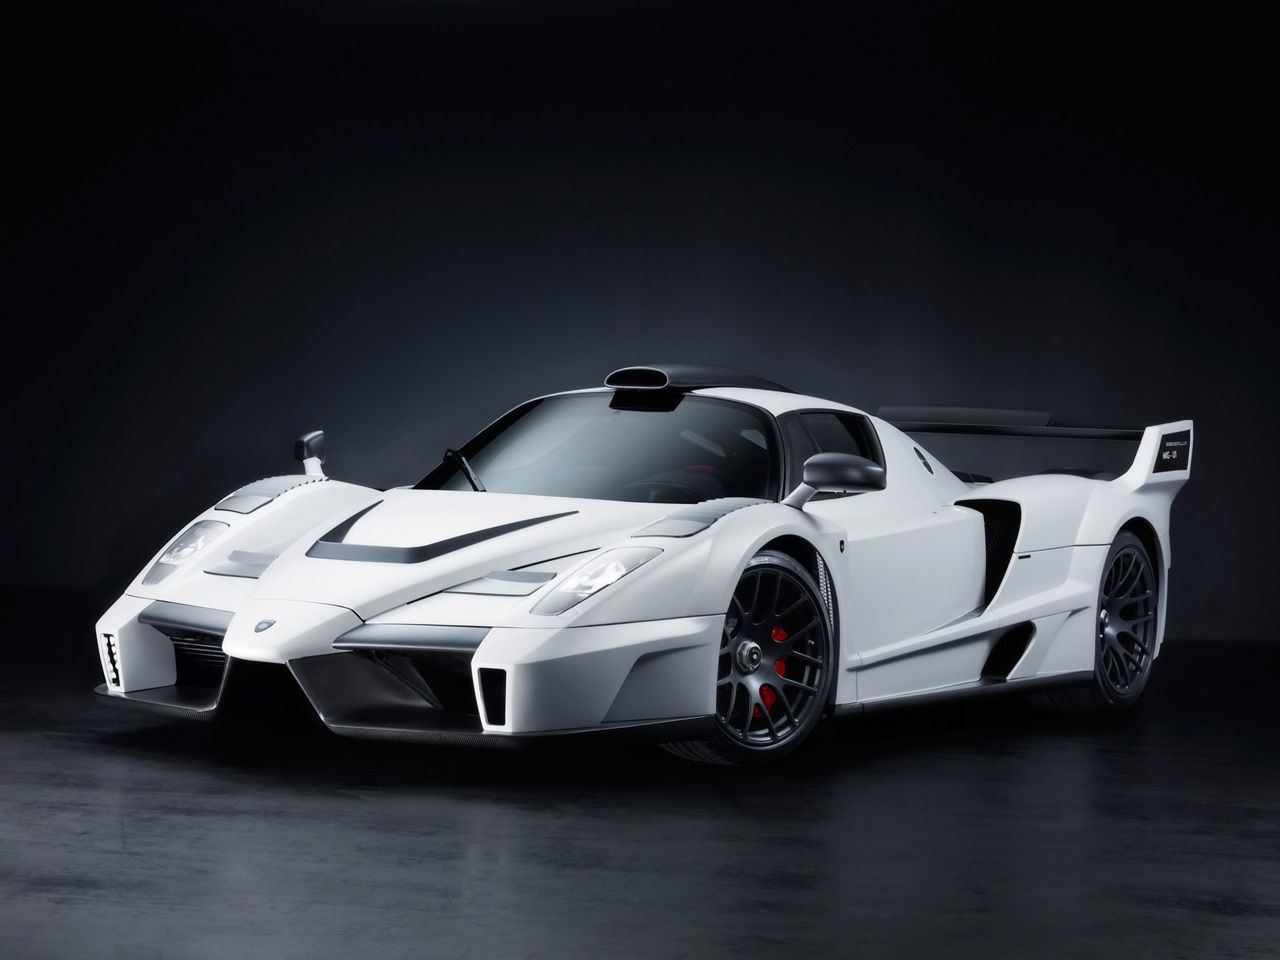 Gallery for - ferrari enzo pictures wallpaper